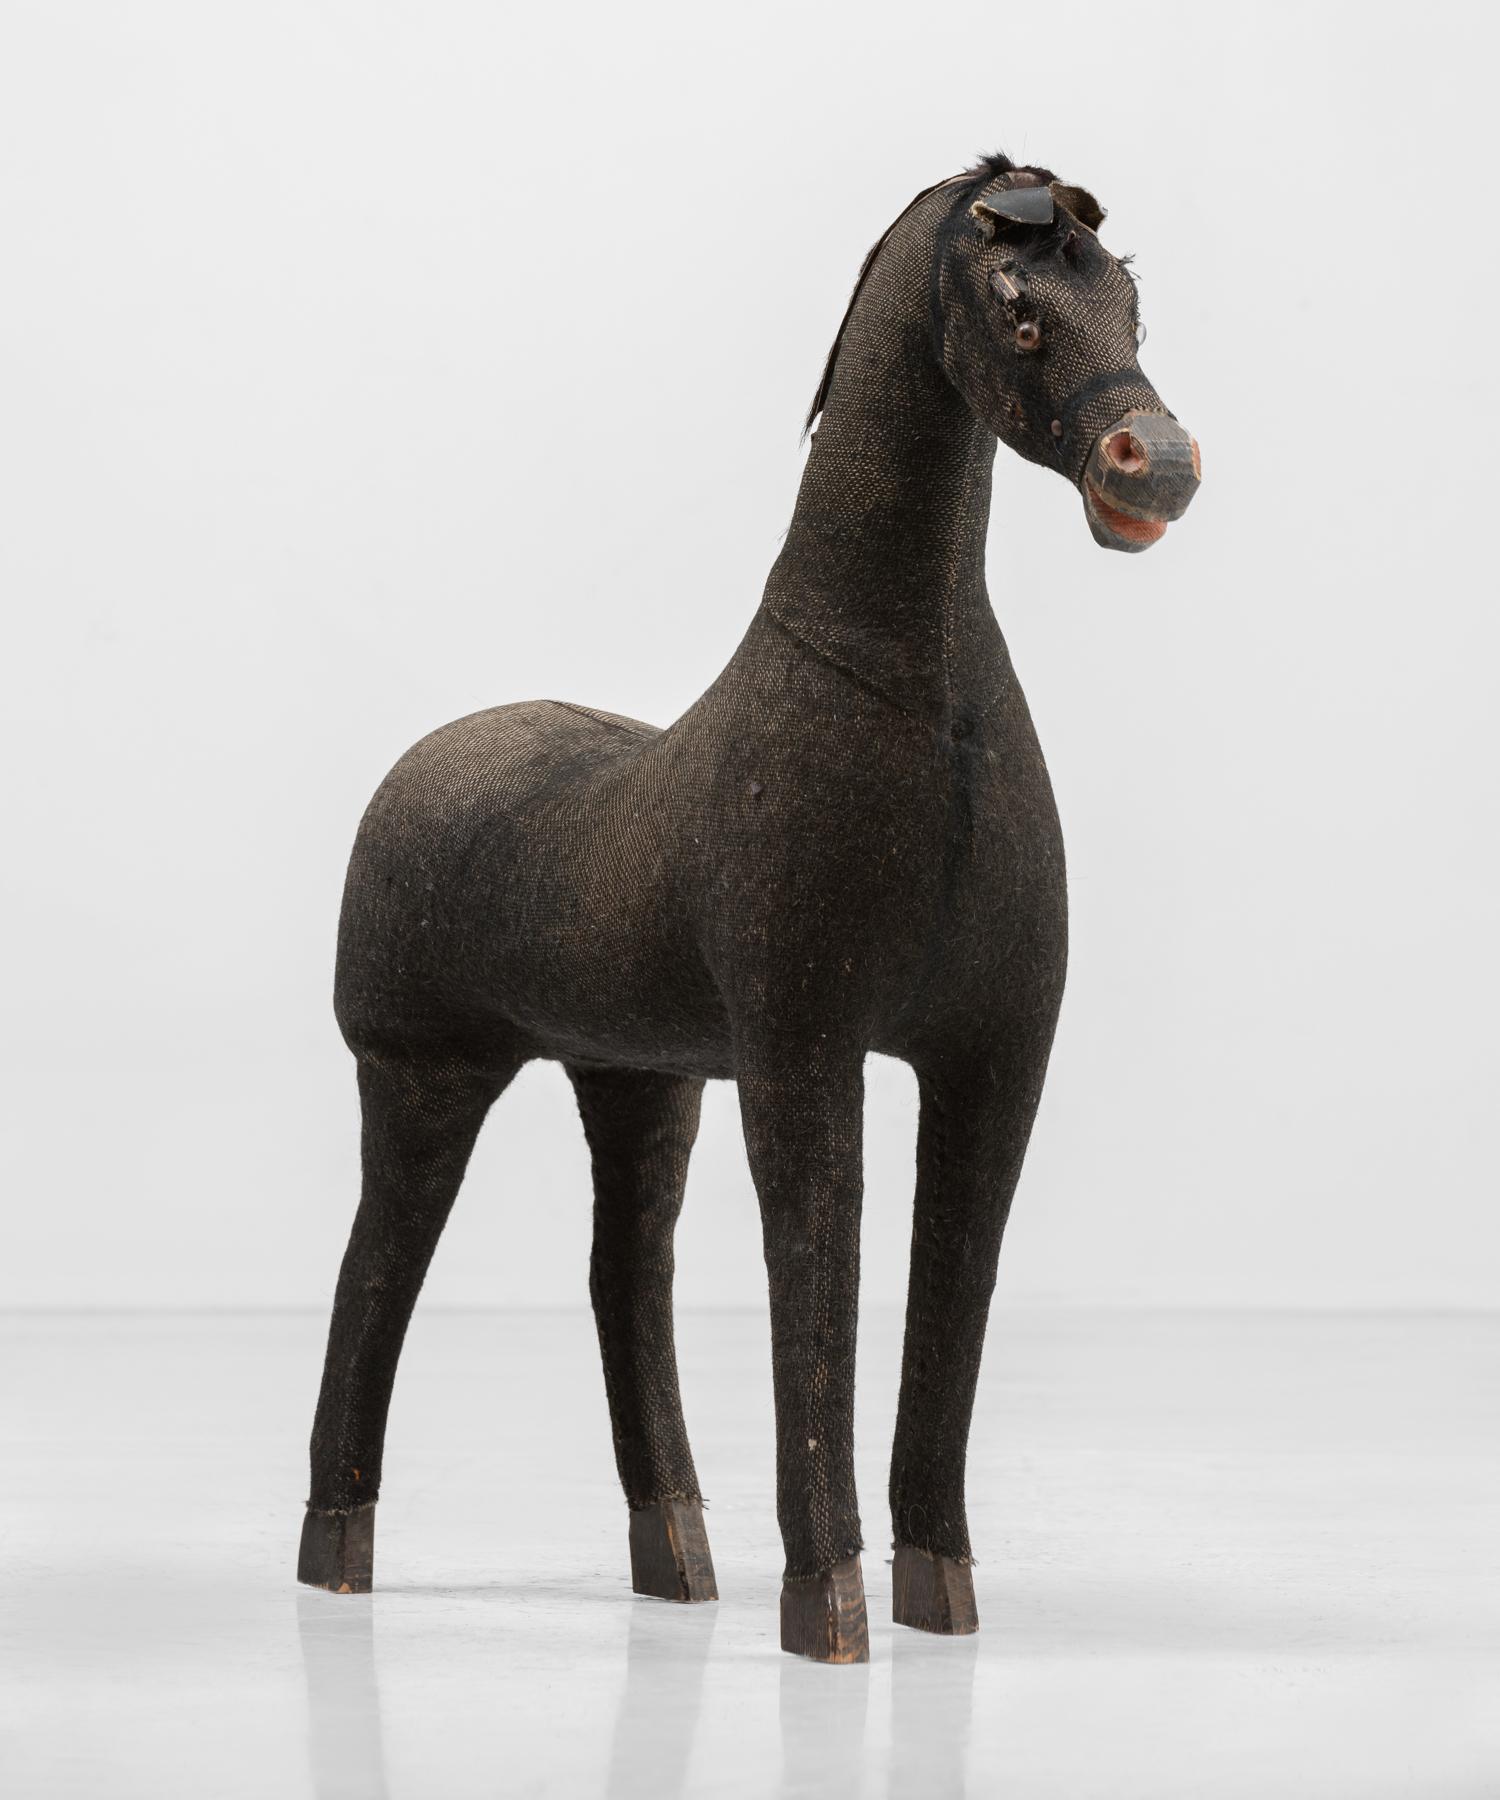 Black Cloth Horse, circa 1890

Petite horse, hand-sewn of a black textured fabric, includes wooden details.